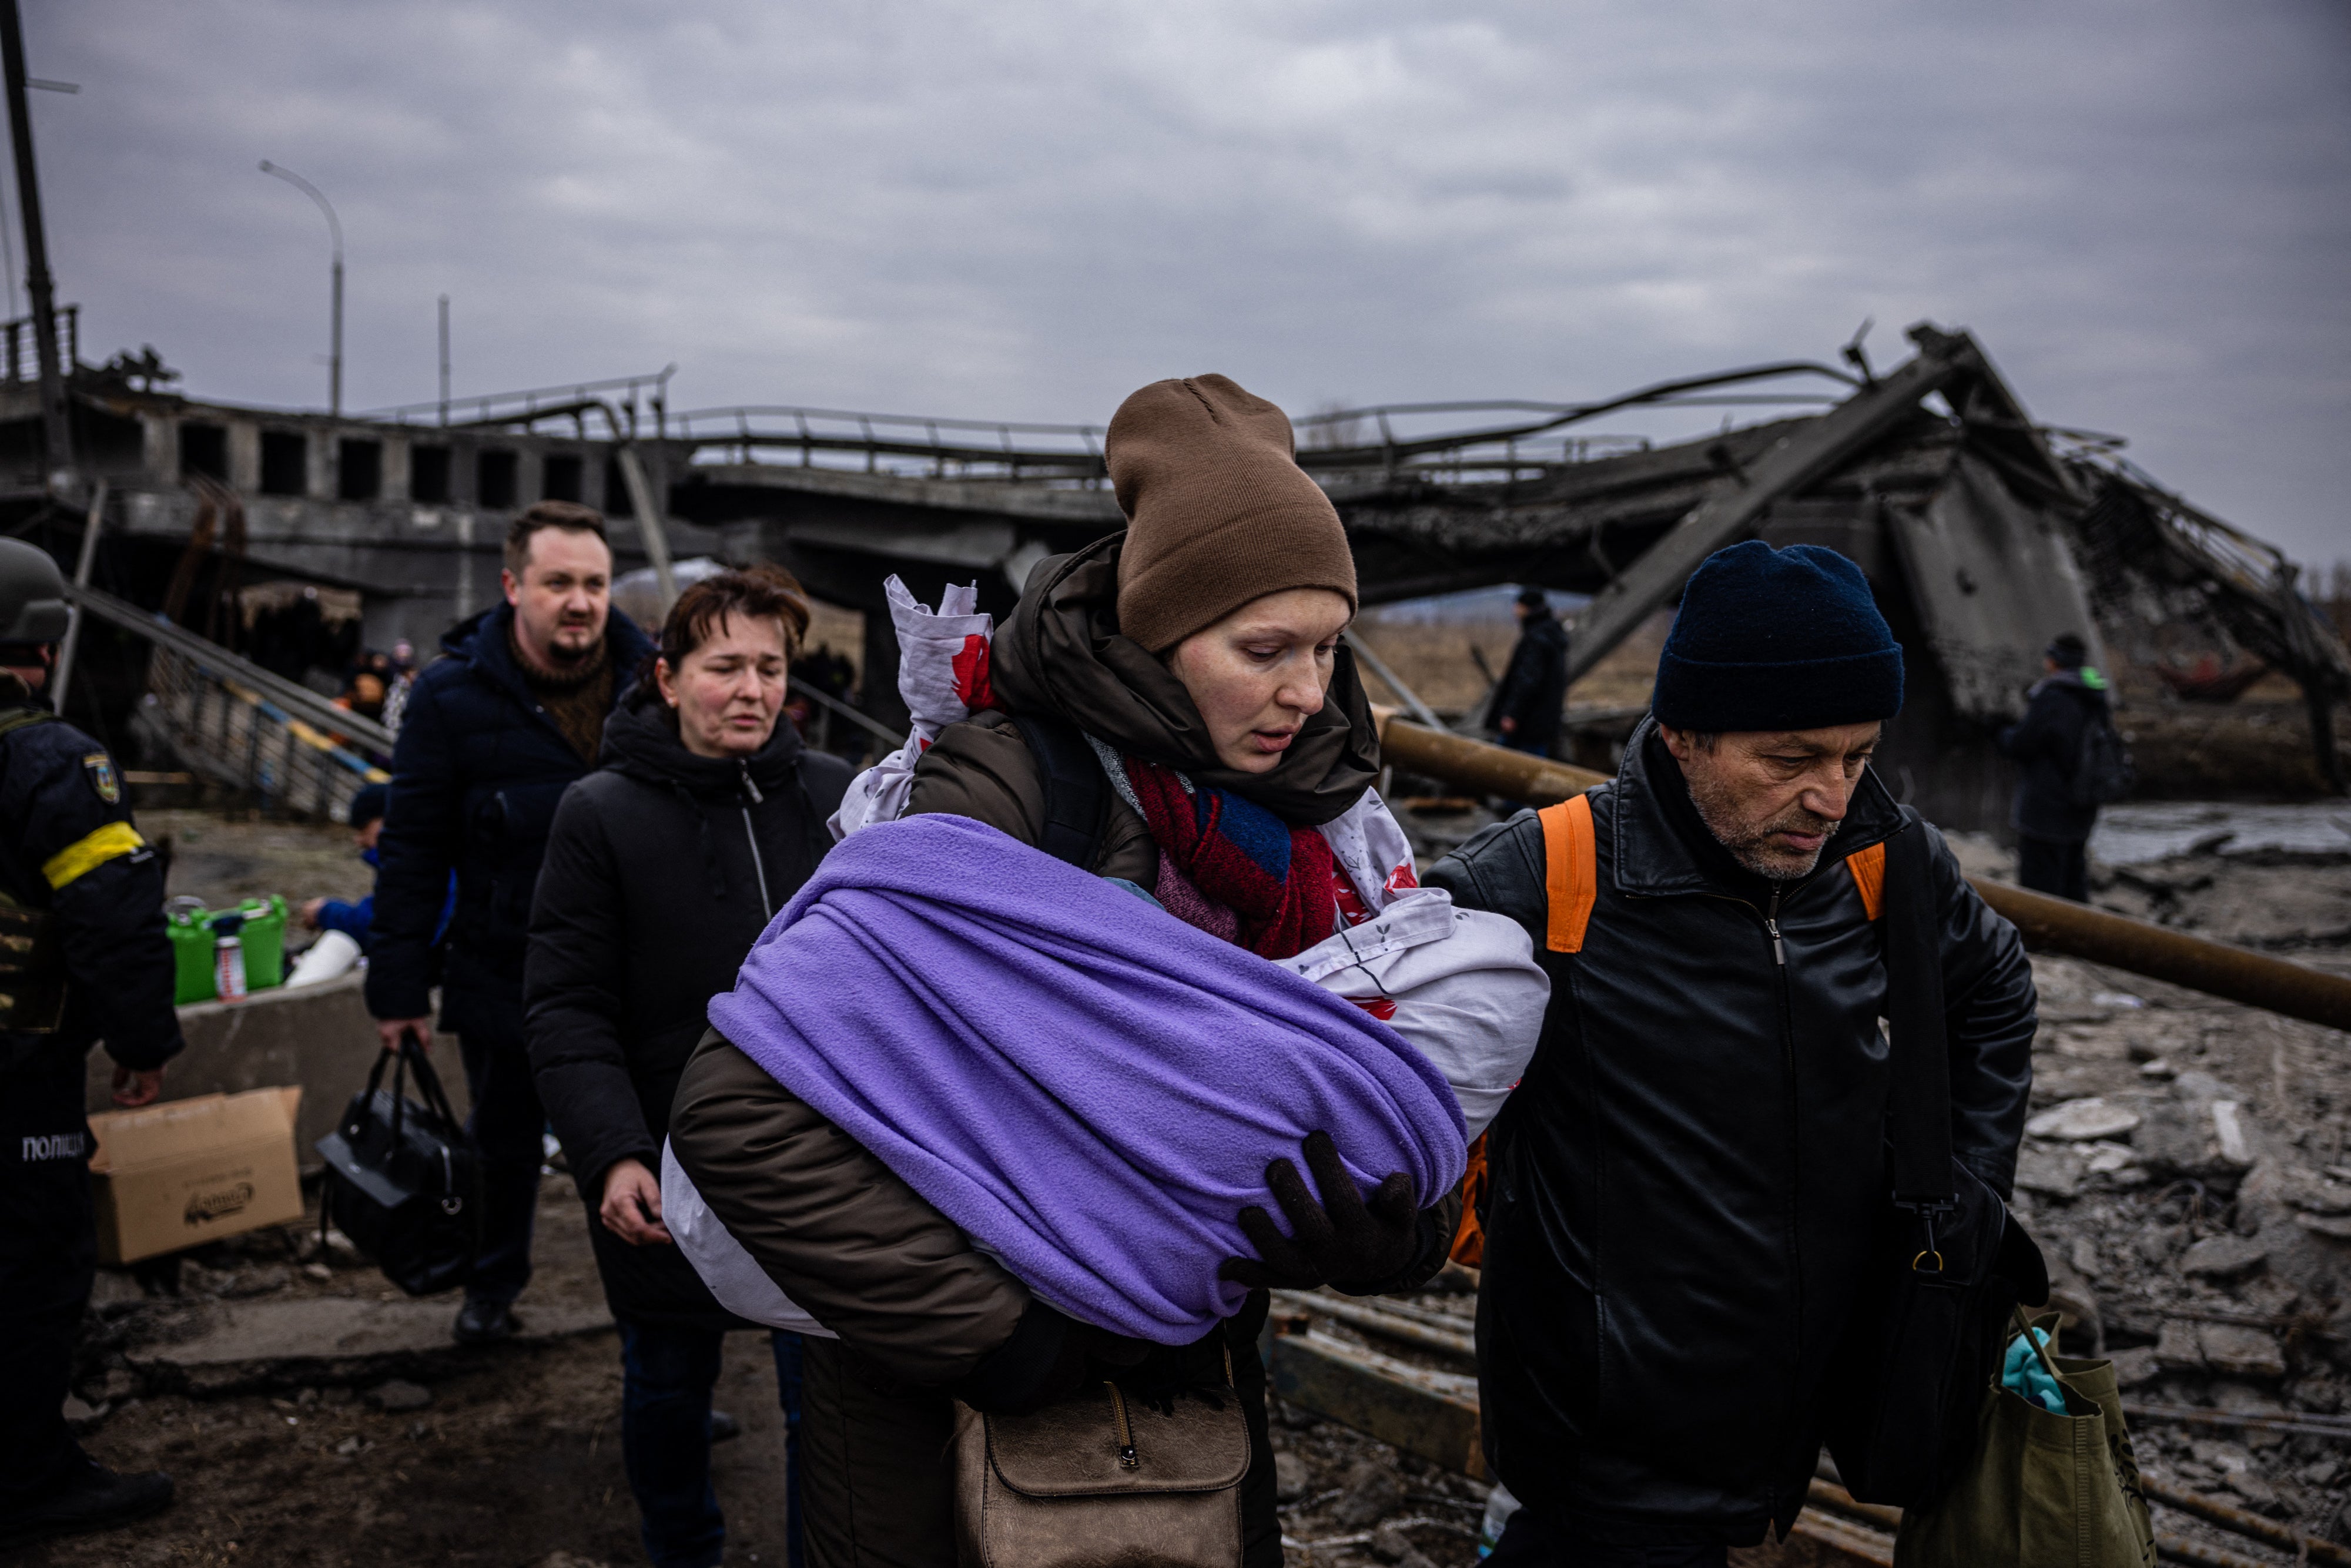 The majority of refugees from the war in Ukraine are women and children